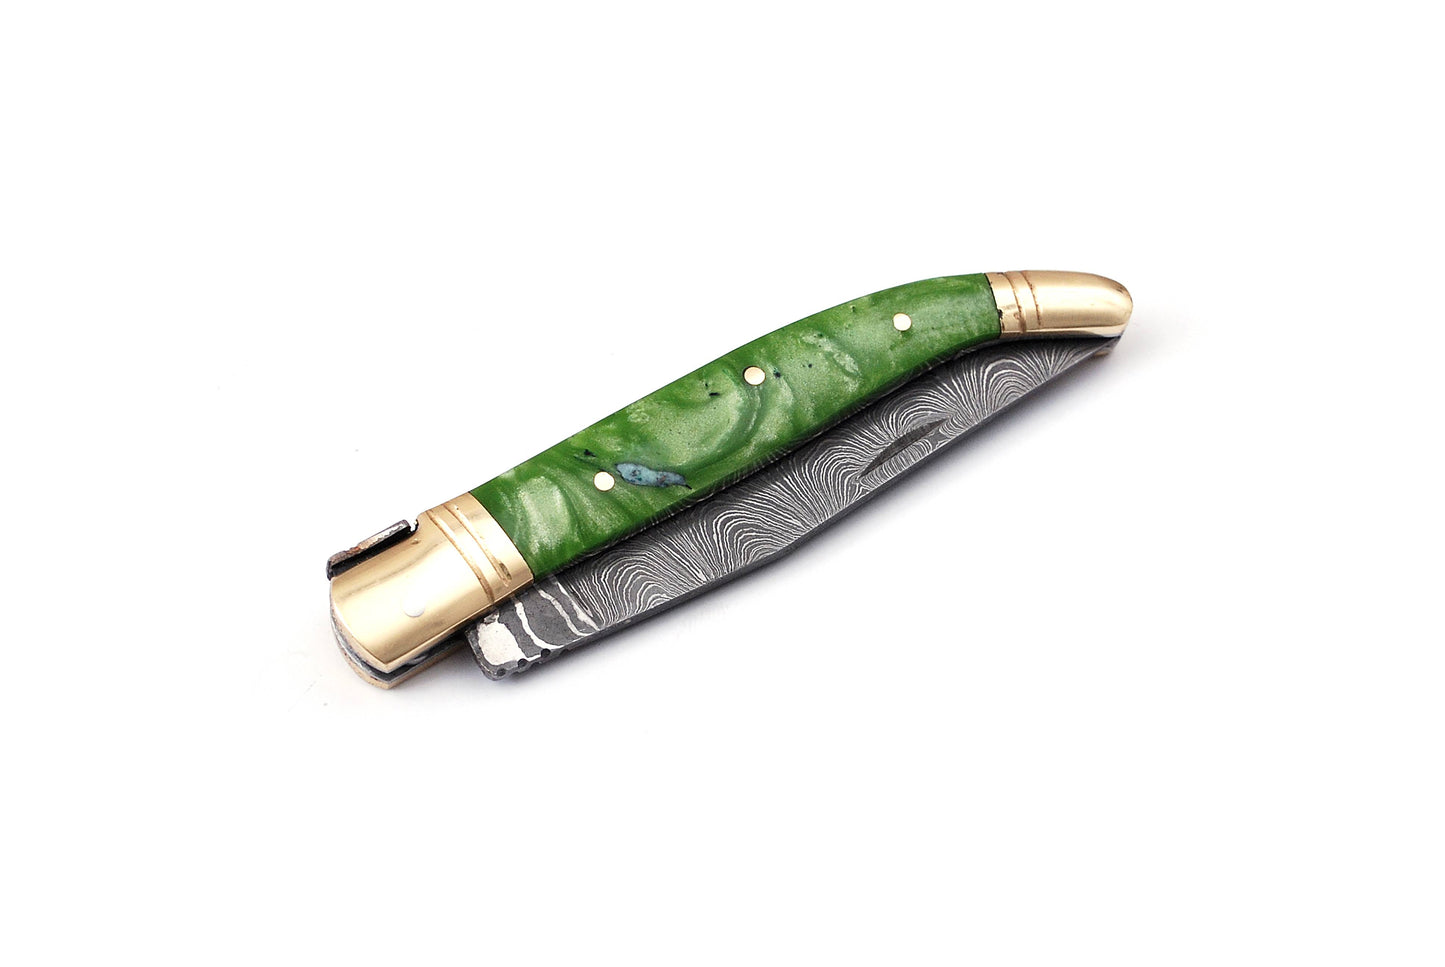 Laguiole Folding Damascus steel knife, 8.5" Long with 4" hand forged custom twist pattern Blade. Green color unshrinkable Raisen scale with brass bolster, Cow hide leather sheath included